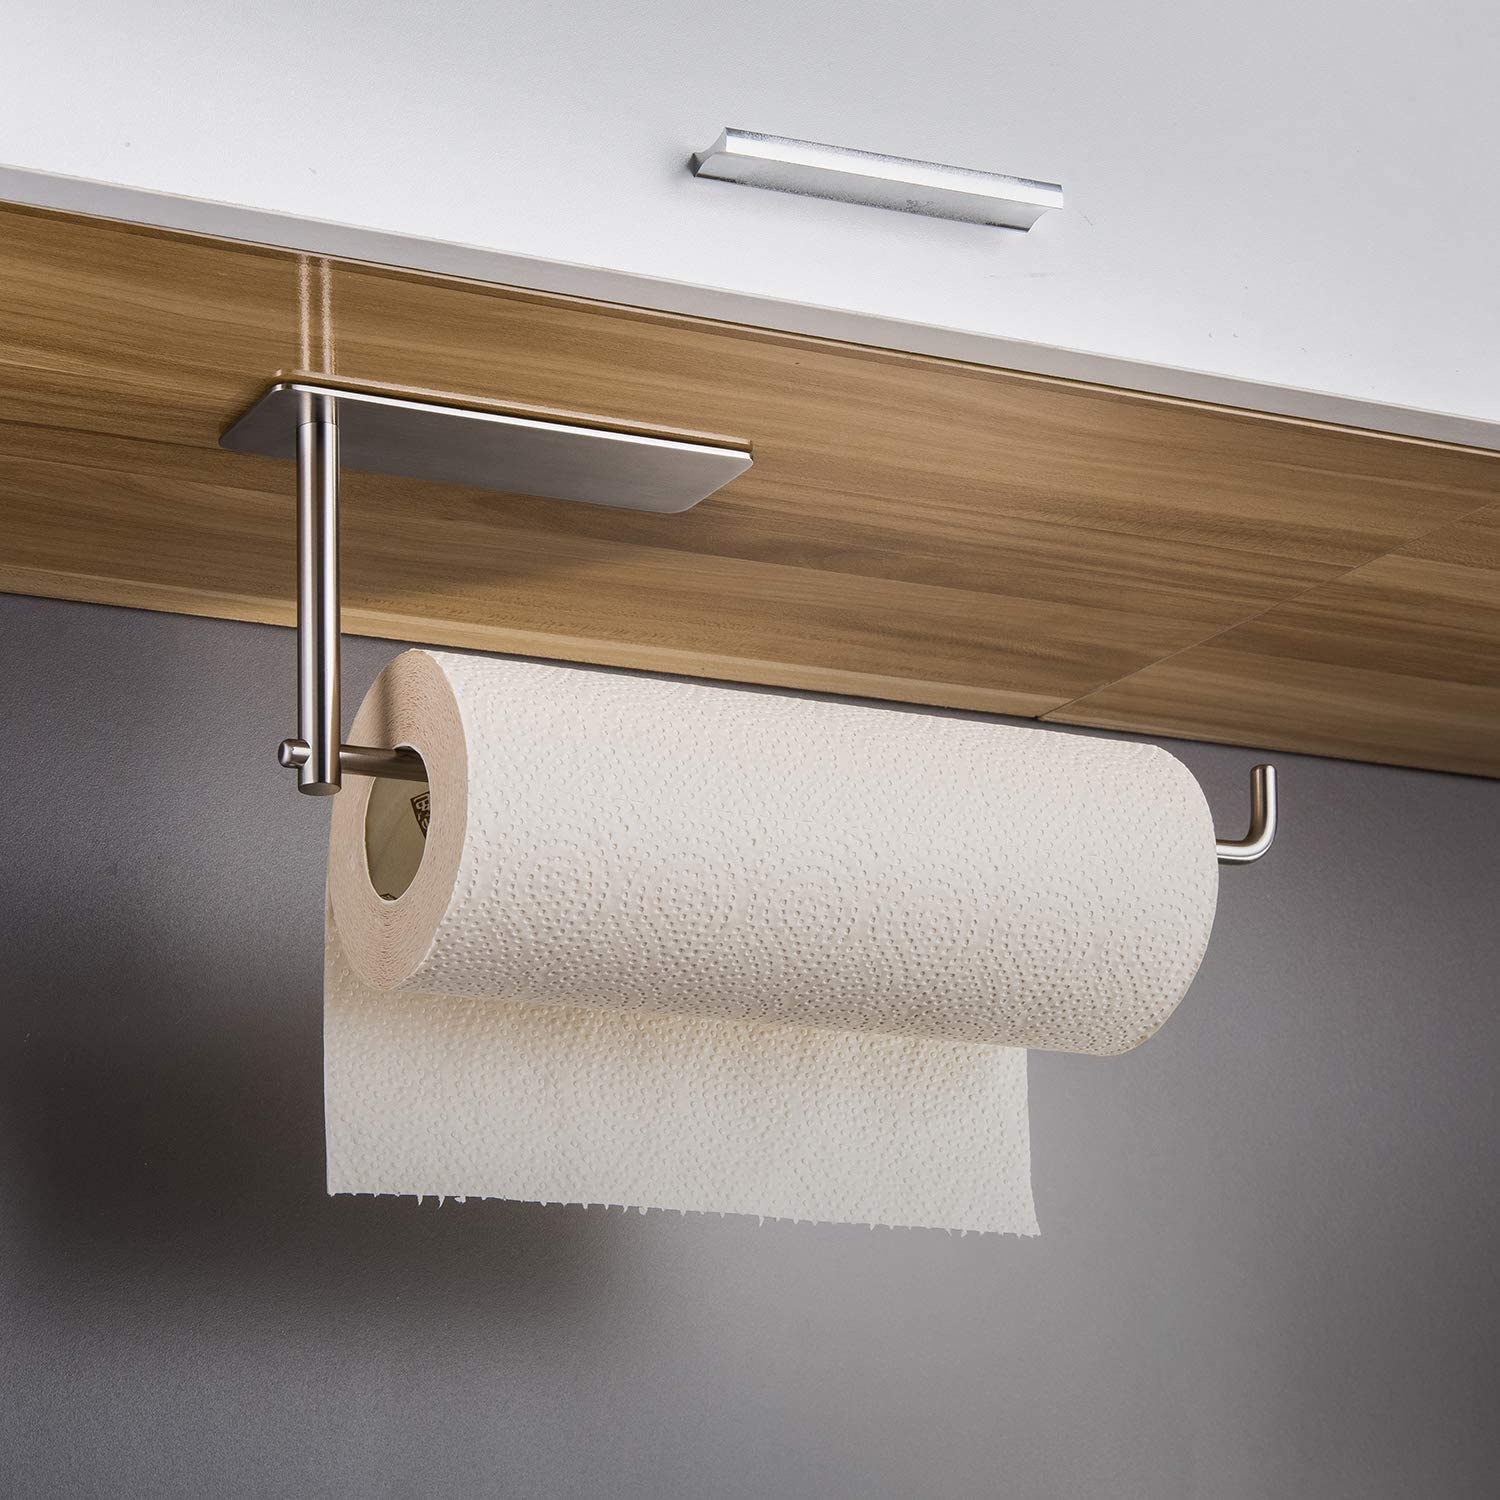 https://www.wideopencountry.com/wp-content/uploads/sites/4/eats/2021/03/SUNTECH-Paper-Towel-Holder-Under-Kitchen-Cabinet-Self-Adhesive-Towel-Paper-Holder-Stick-on-Wall-SUS304-Stainless-Steel-.jpg?resize=1500%2C1500